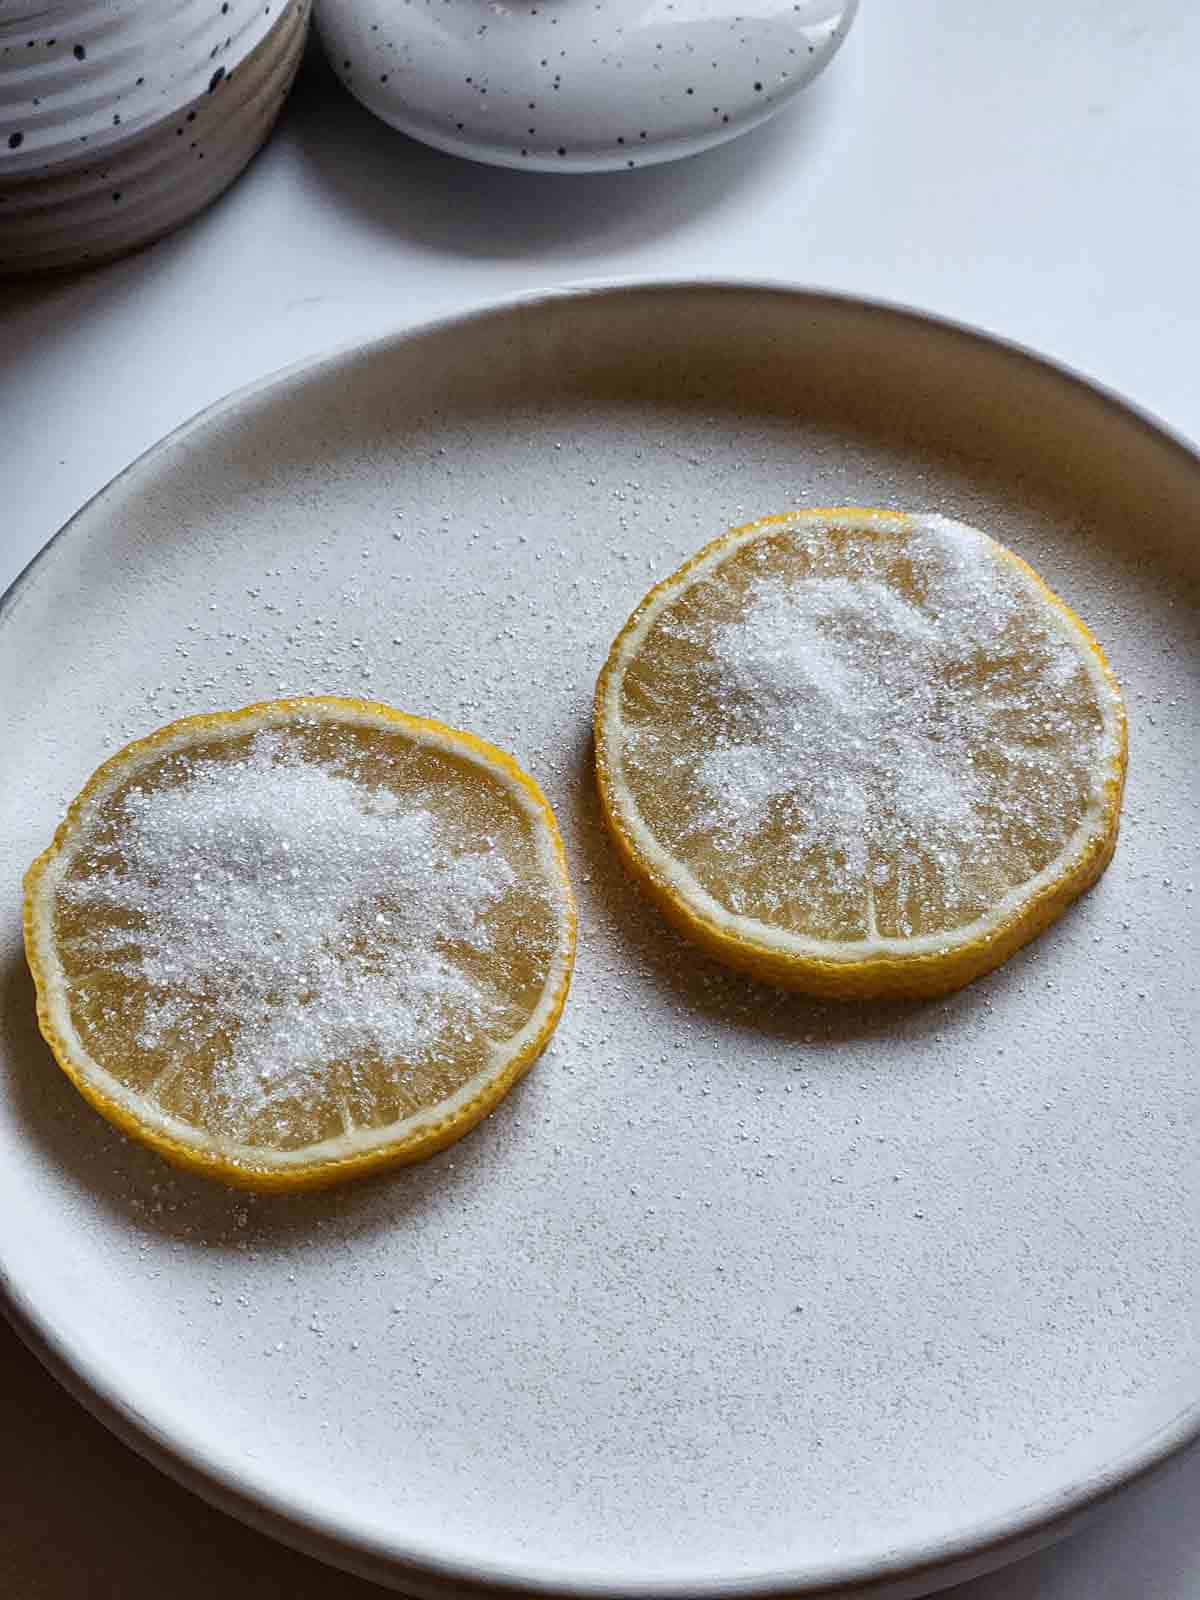 Two lemon slices with sugar on them on a white plate.